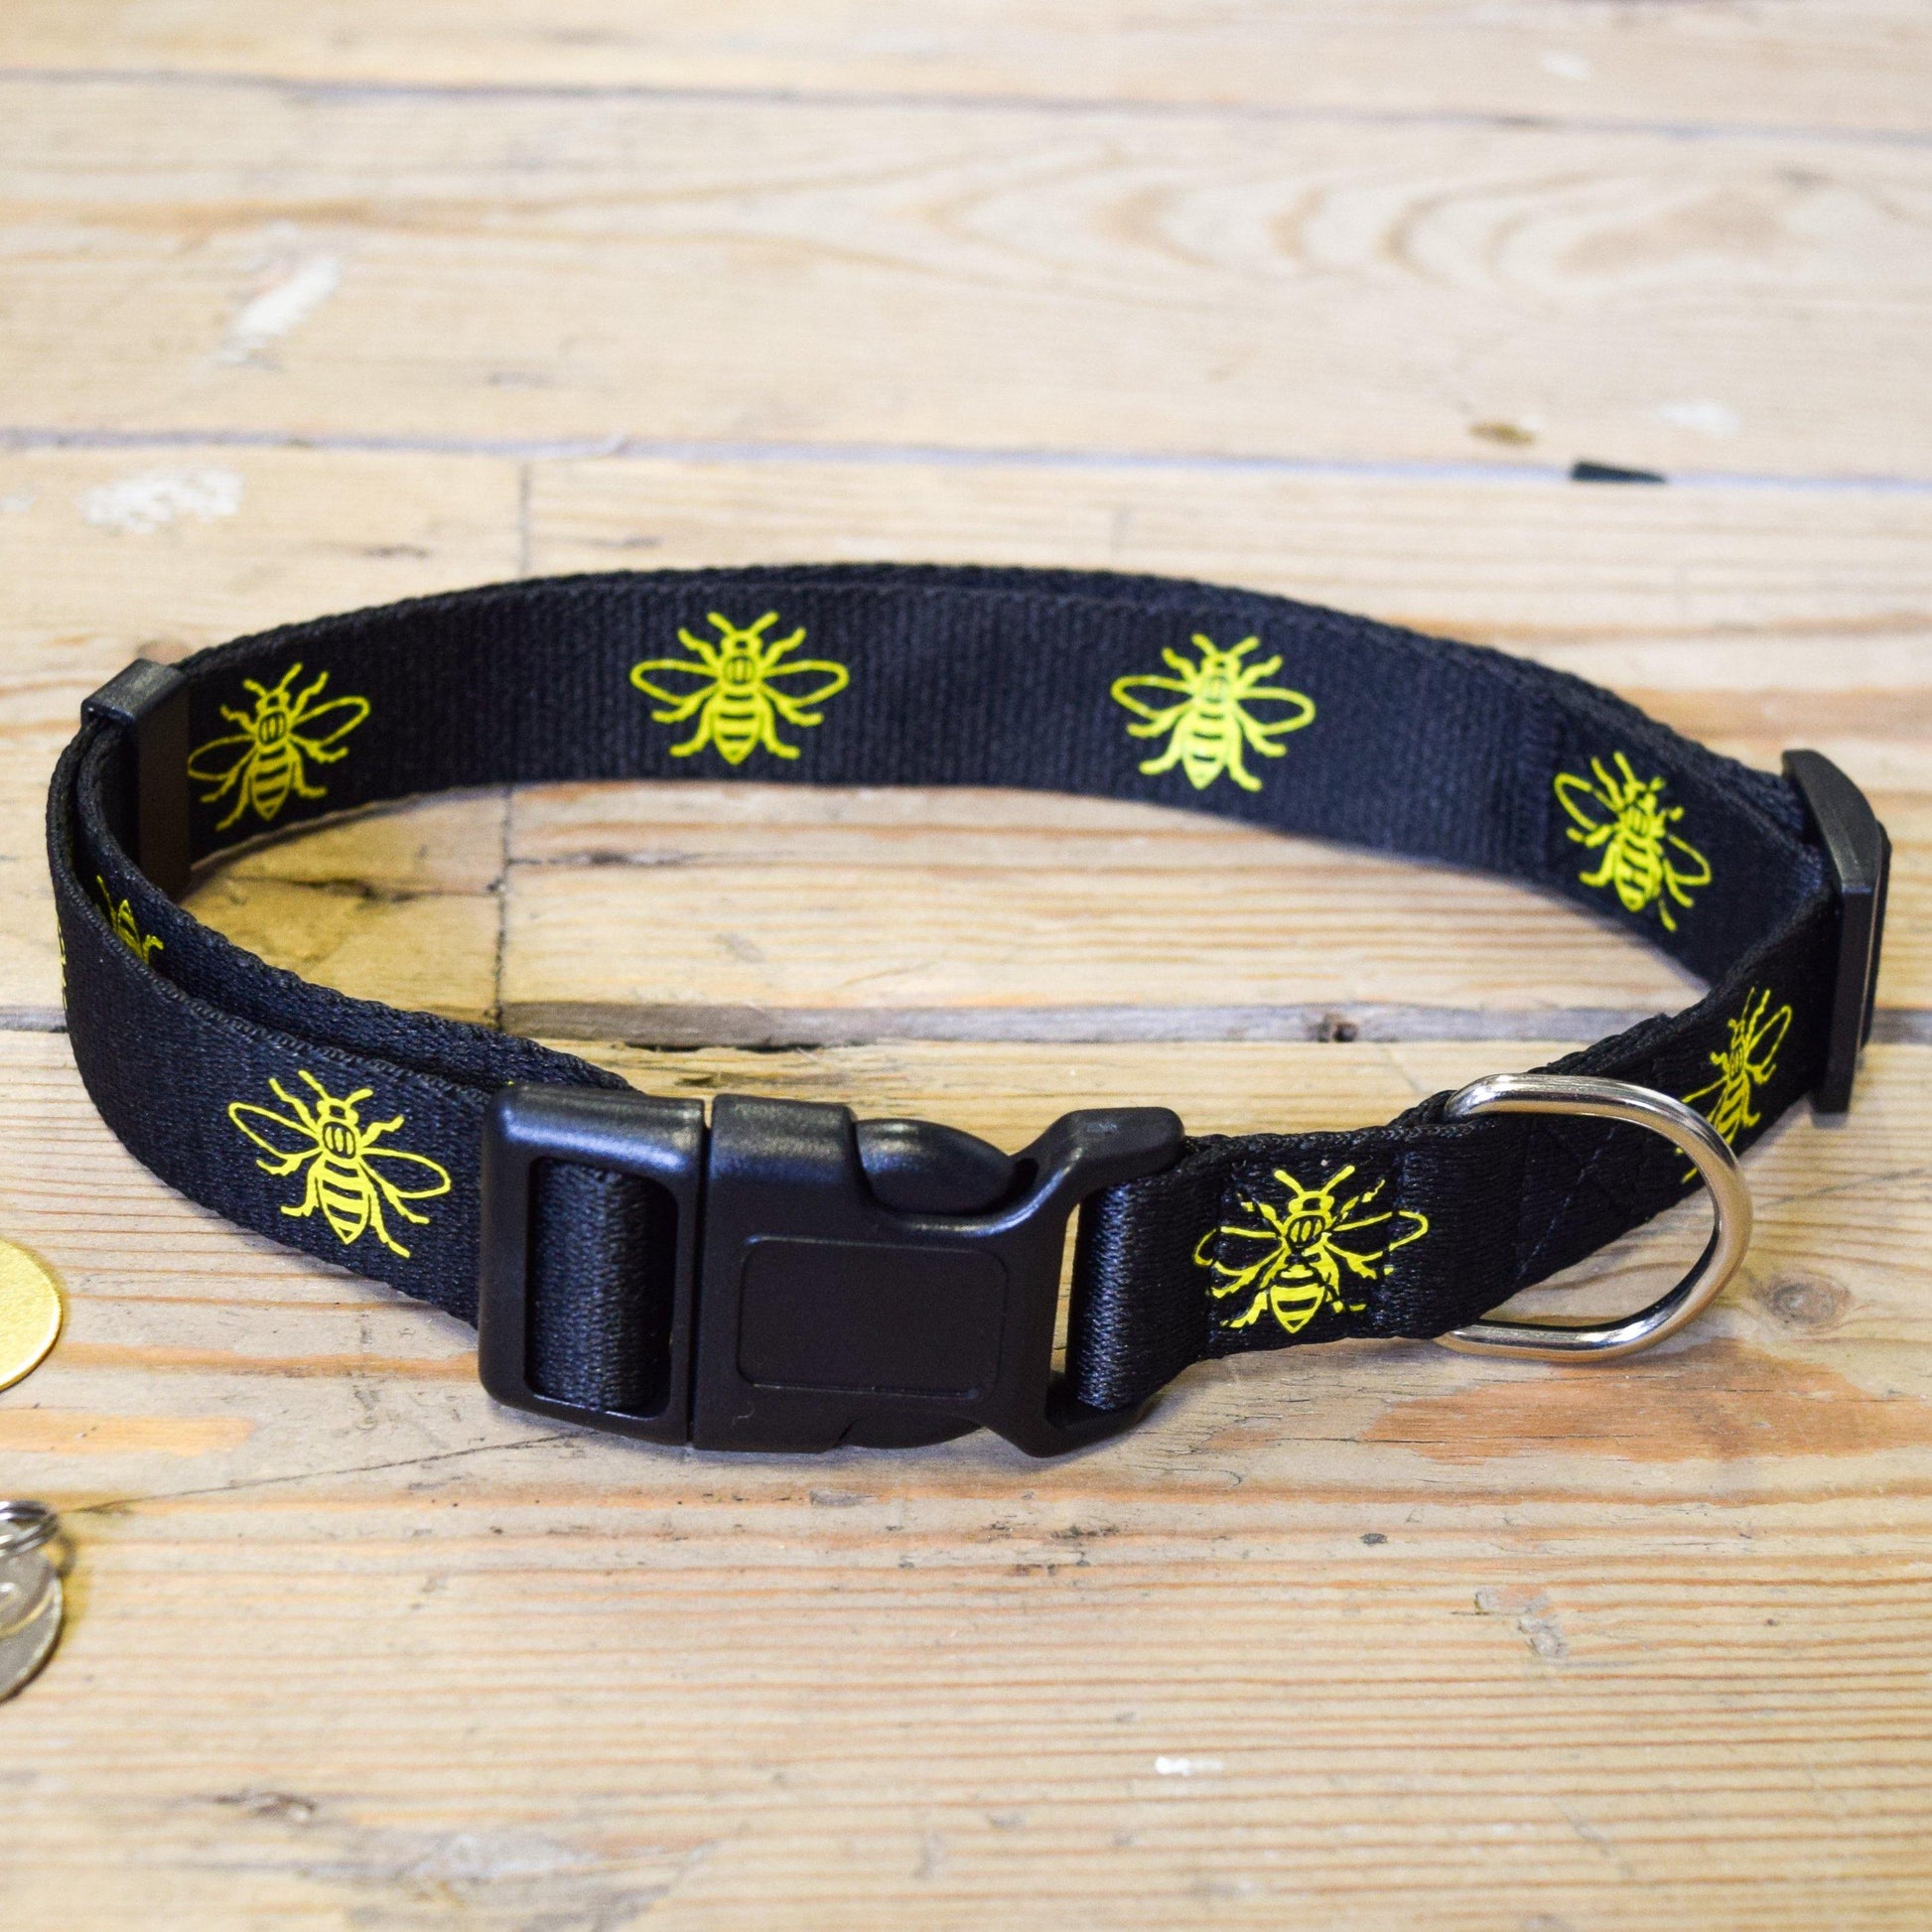 Manchester Bee Dog Collar - The Manchester Shop